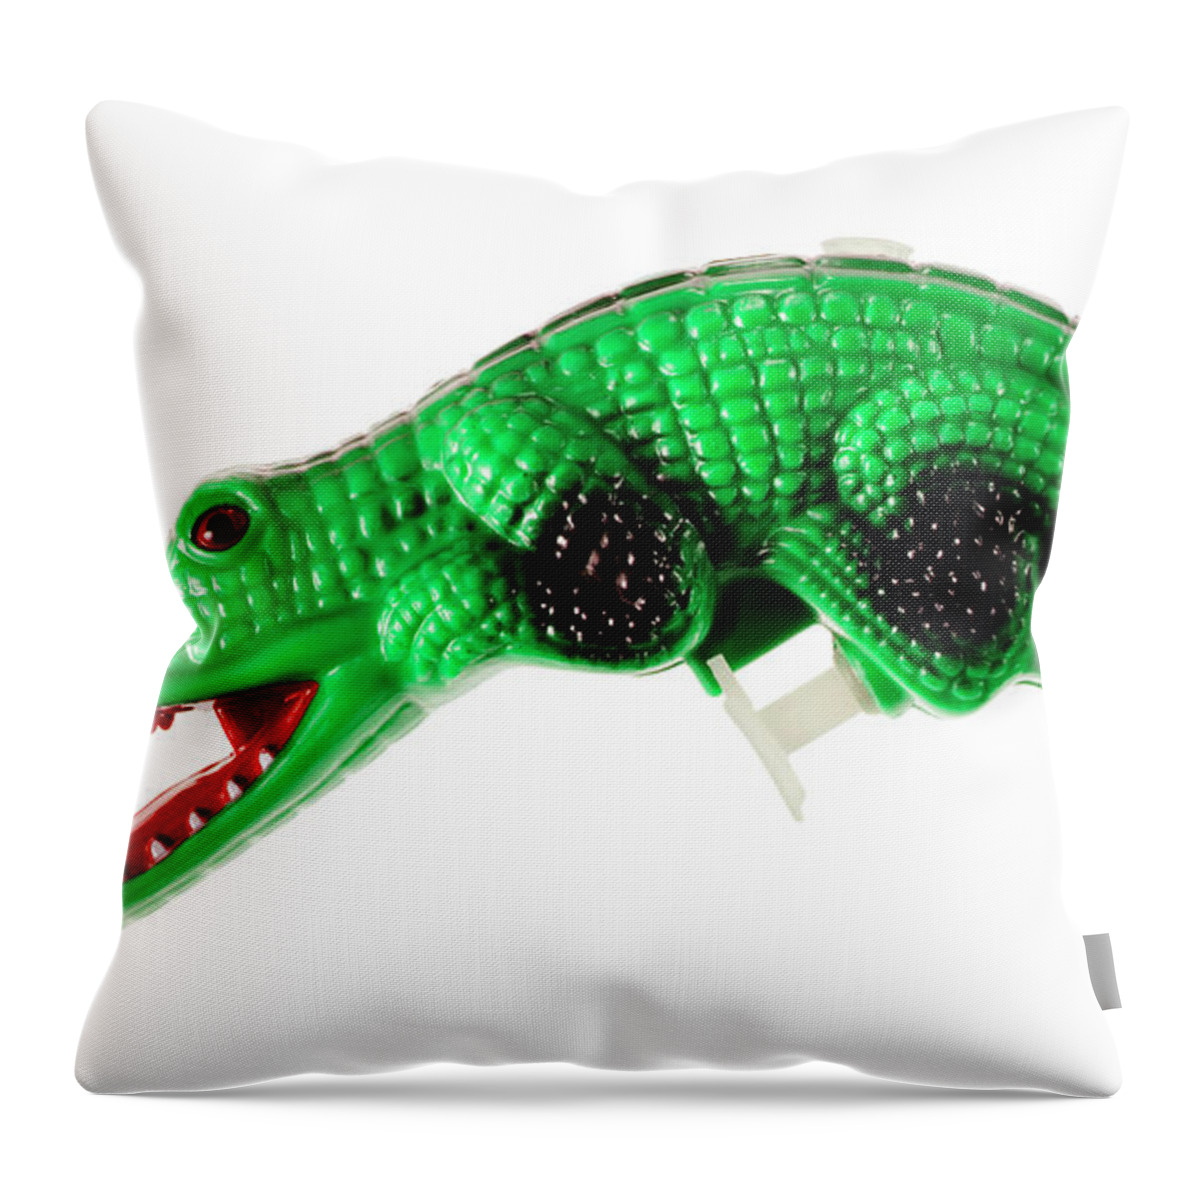 Alligator Throw Pillow featuring the drawing Green Alligator Squirt Gun by CSA Images